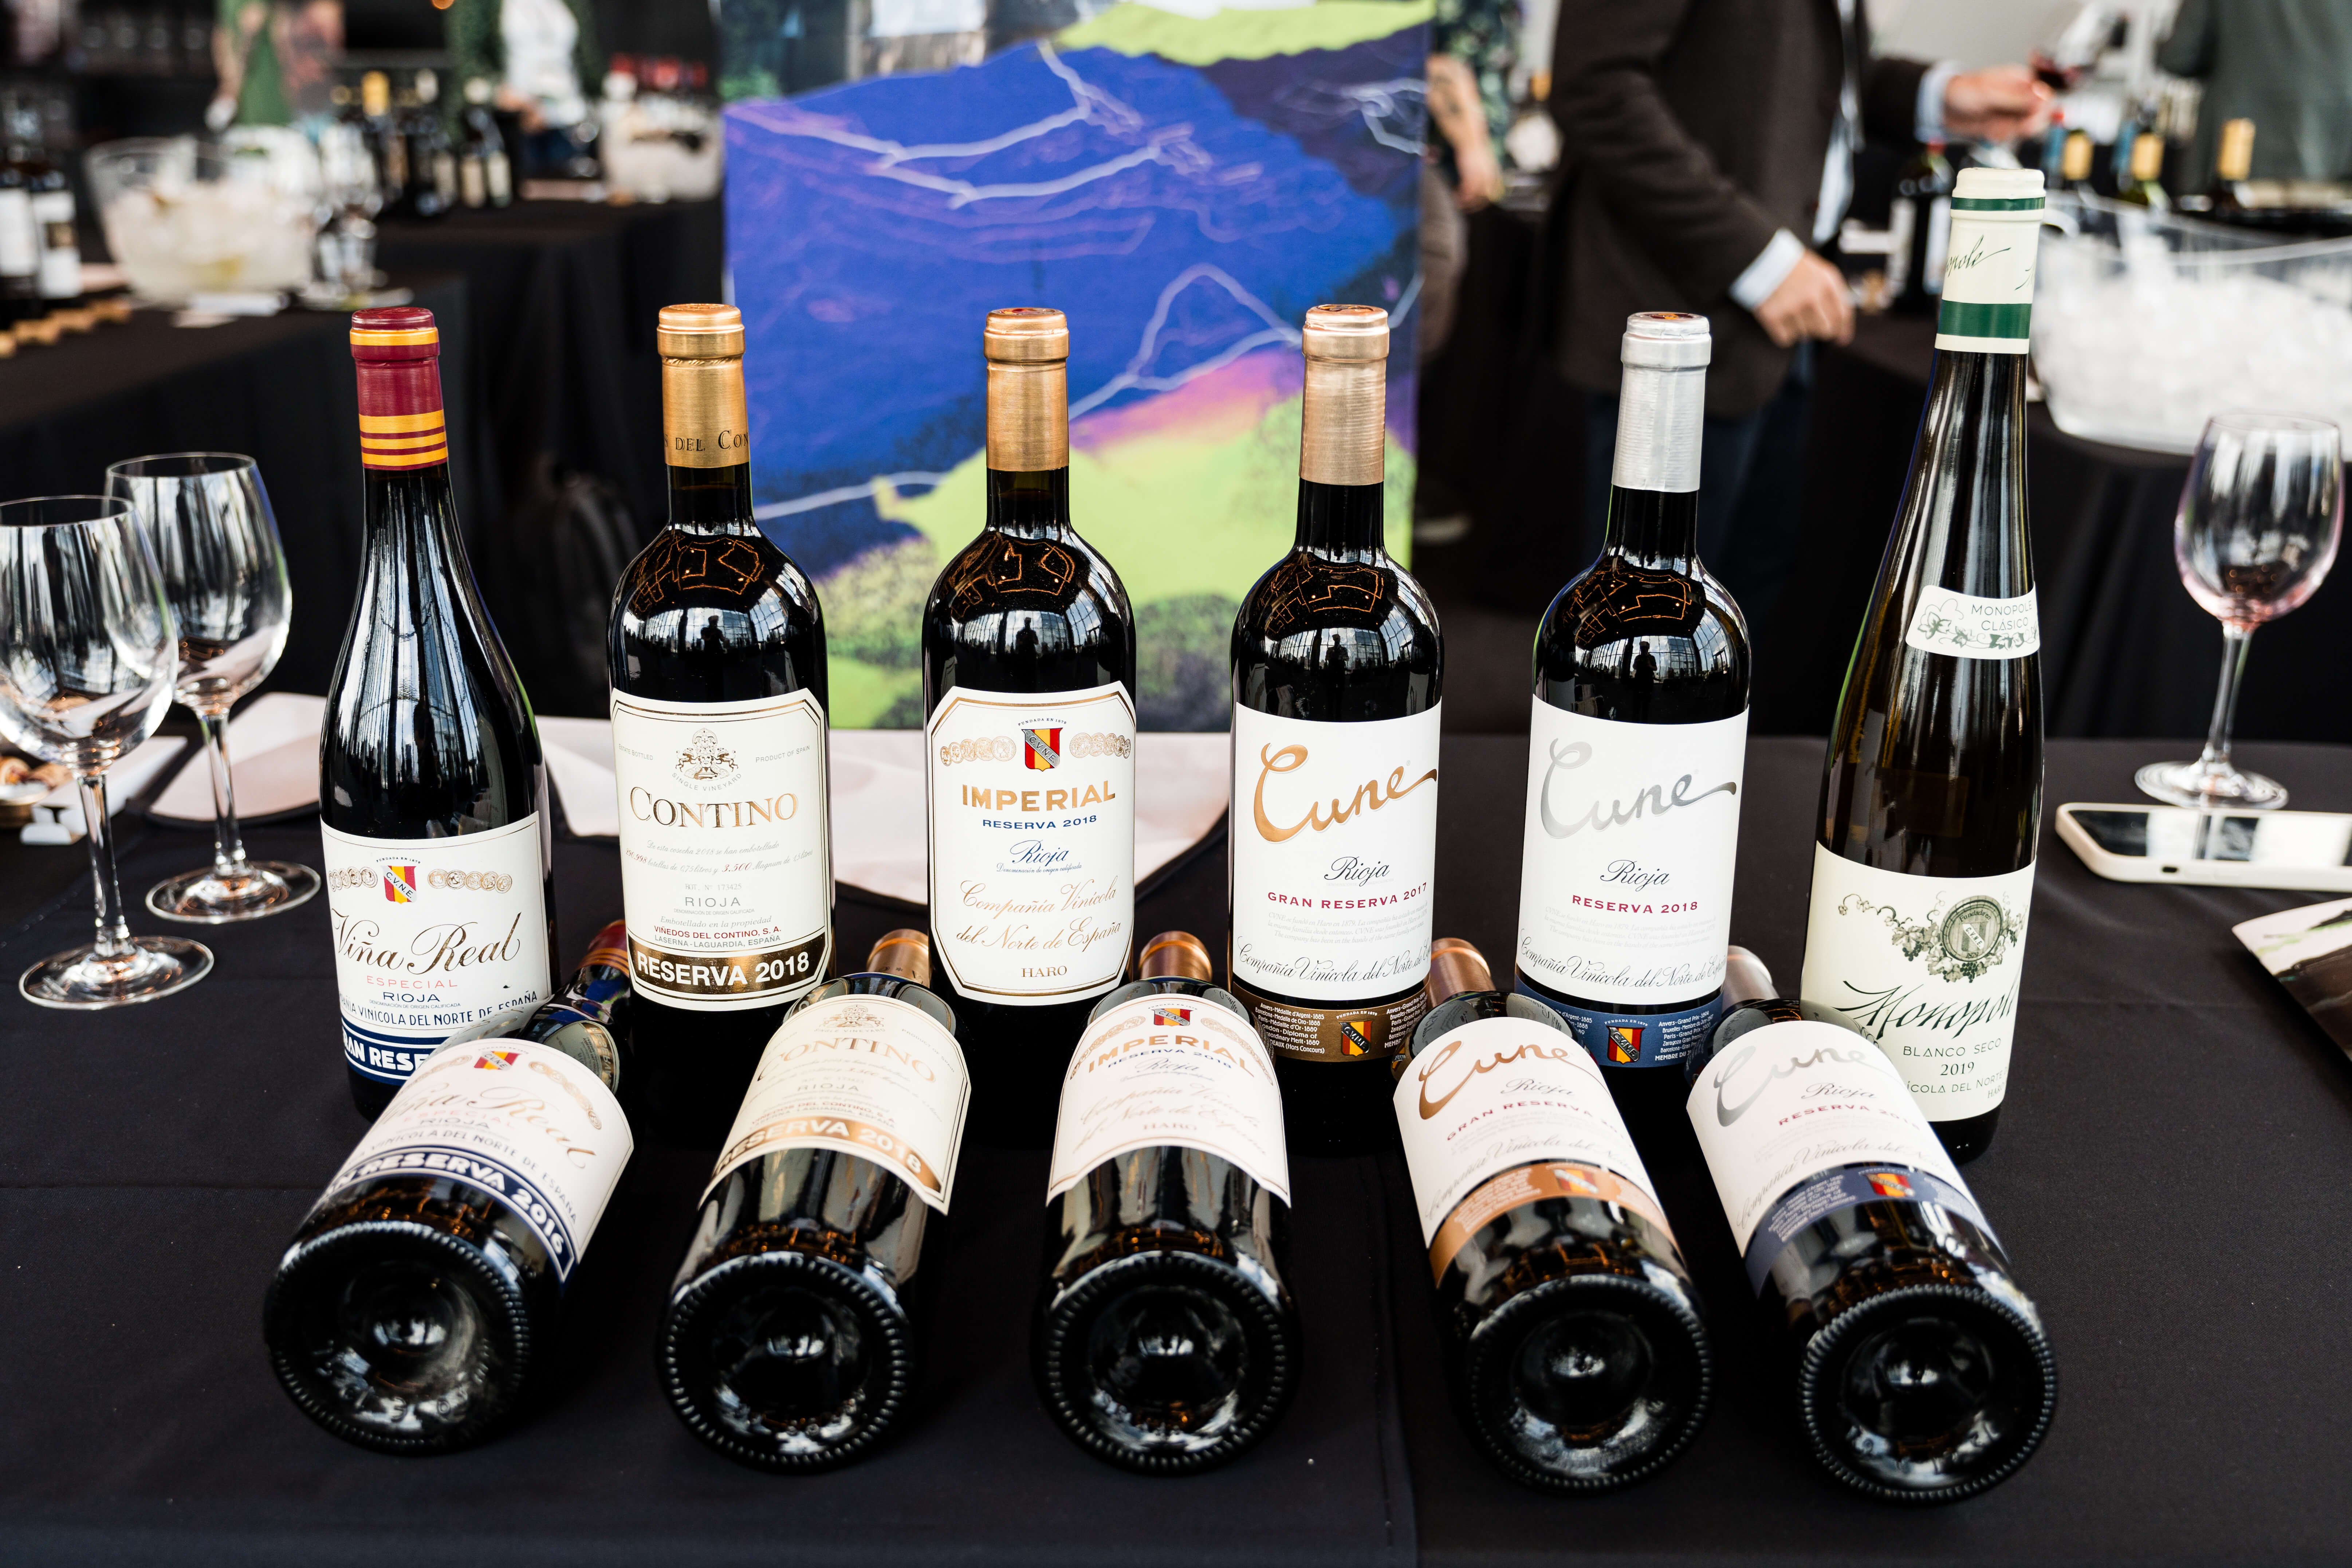 a display of several bottles of red wine